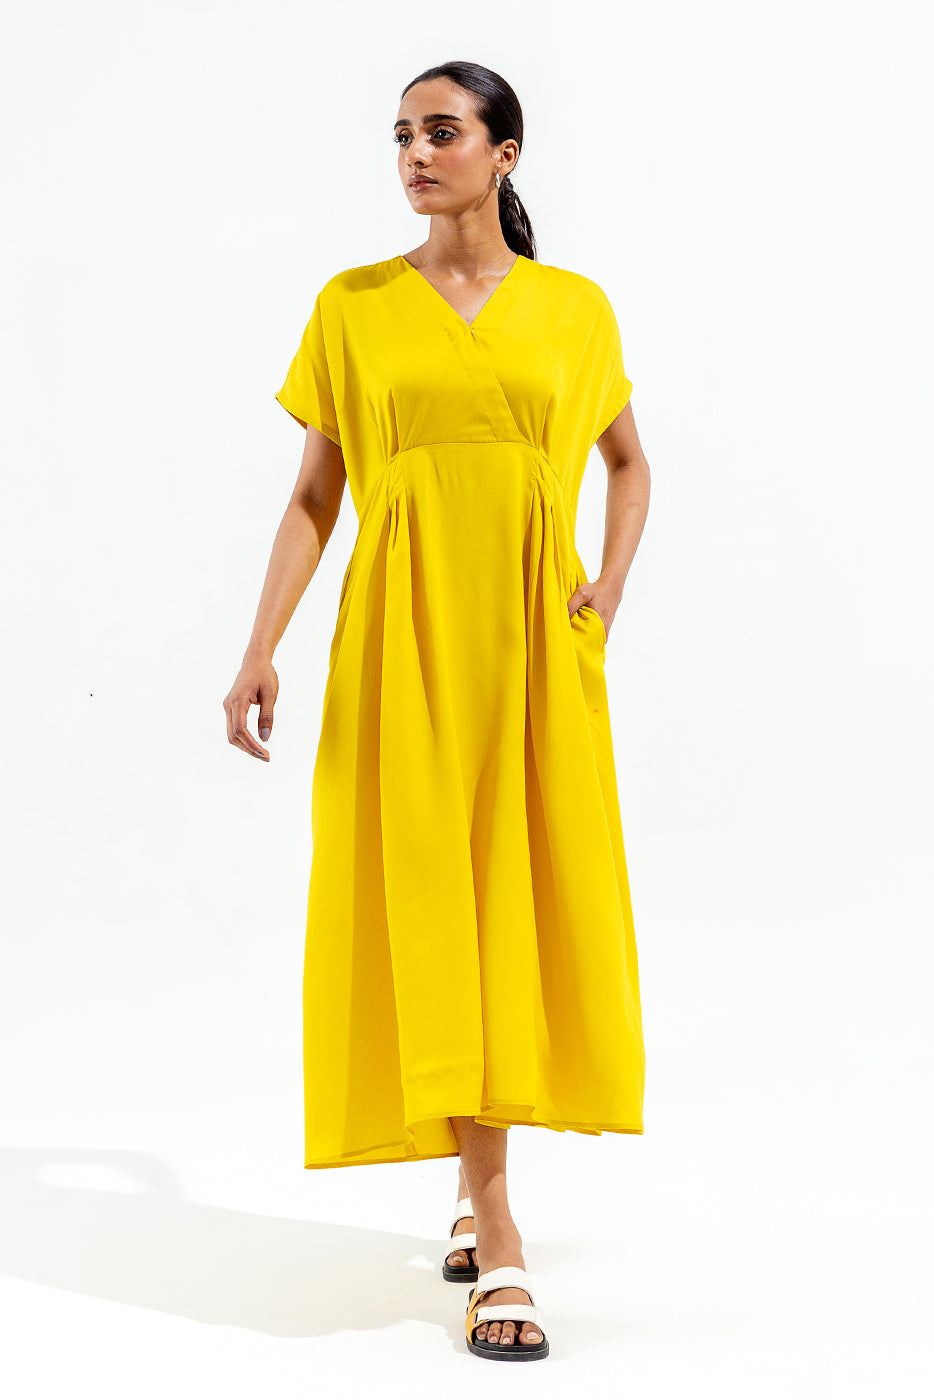 LIME YELLOW PLEATED DRESS